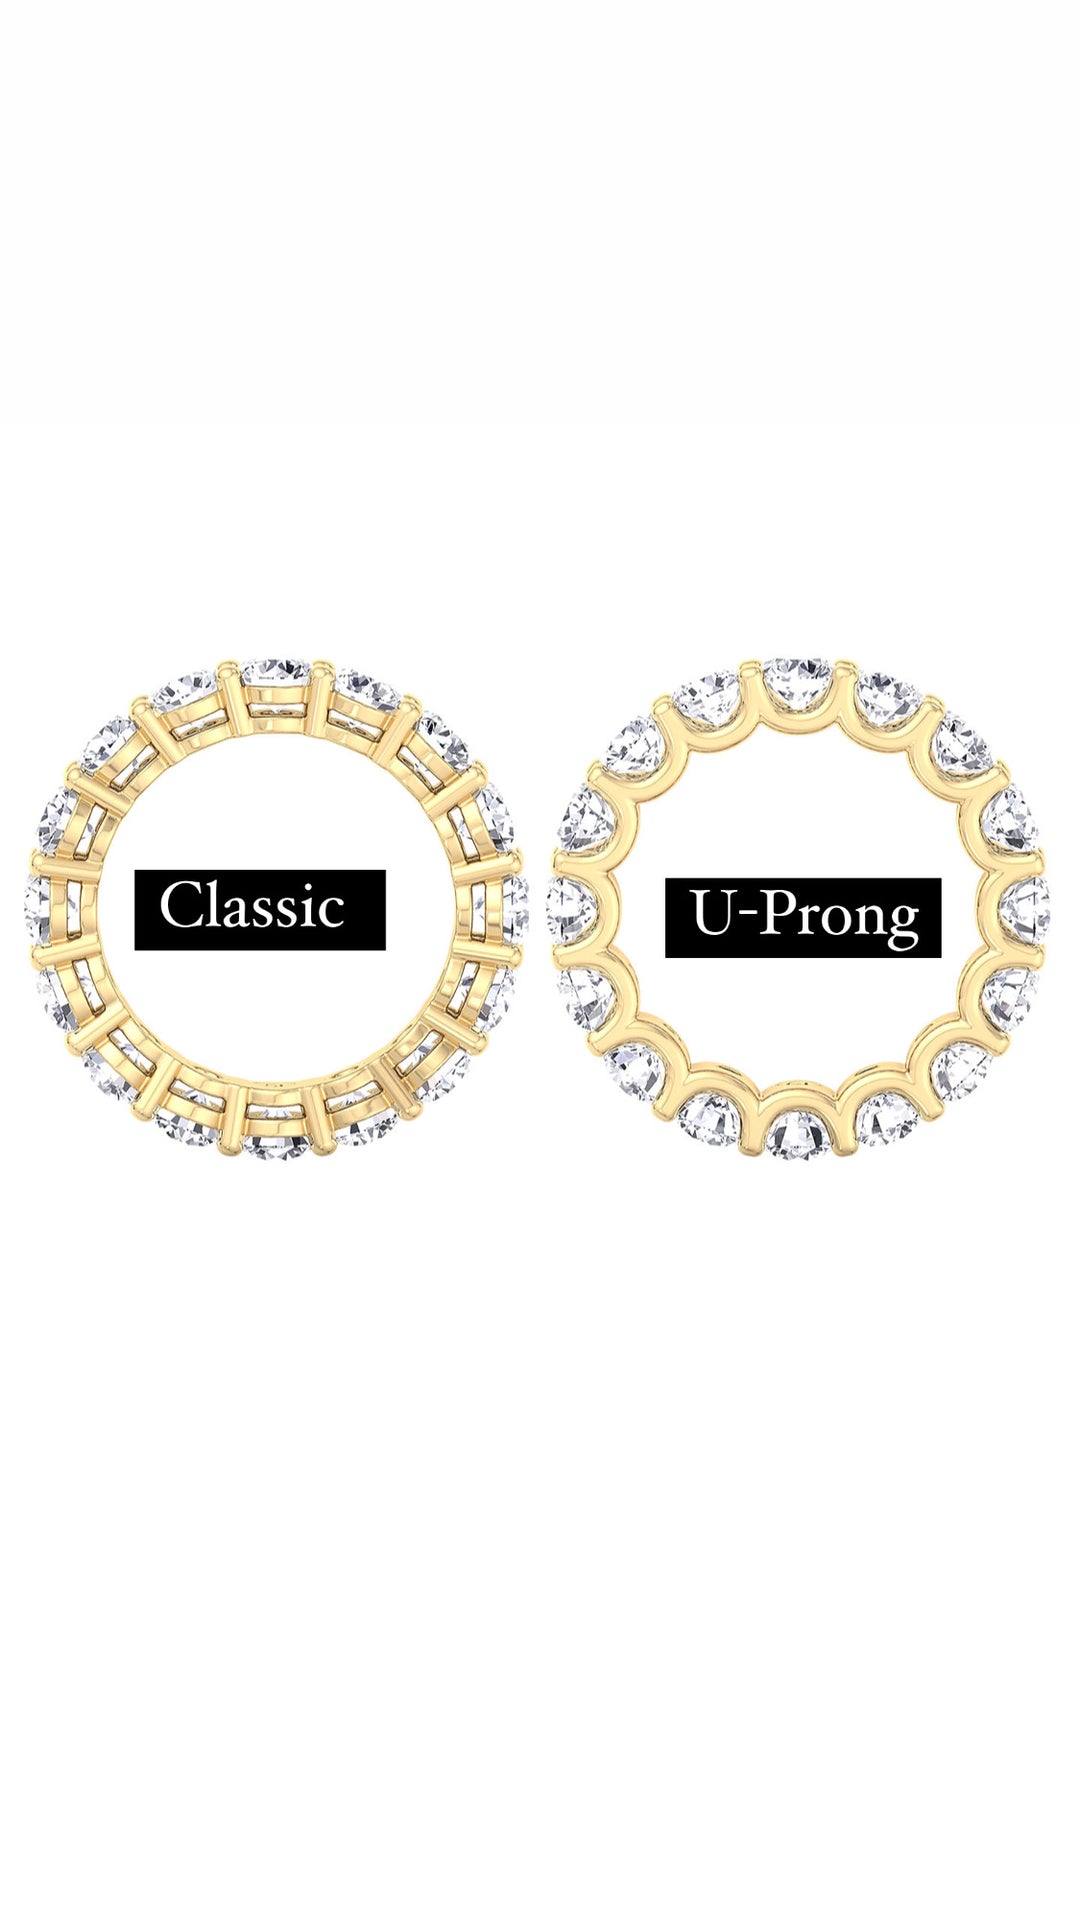 Differences Between U-Prong and Shared Prong Eternity Bands.